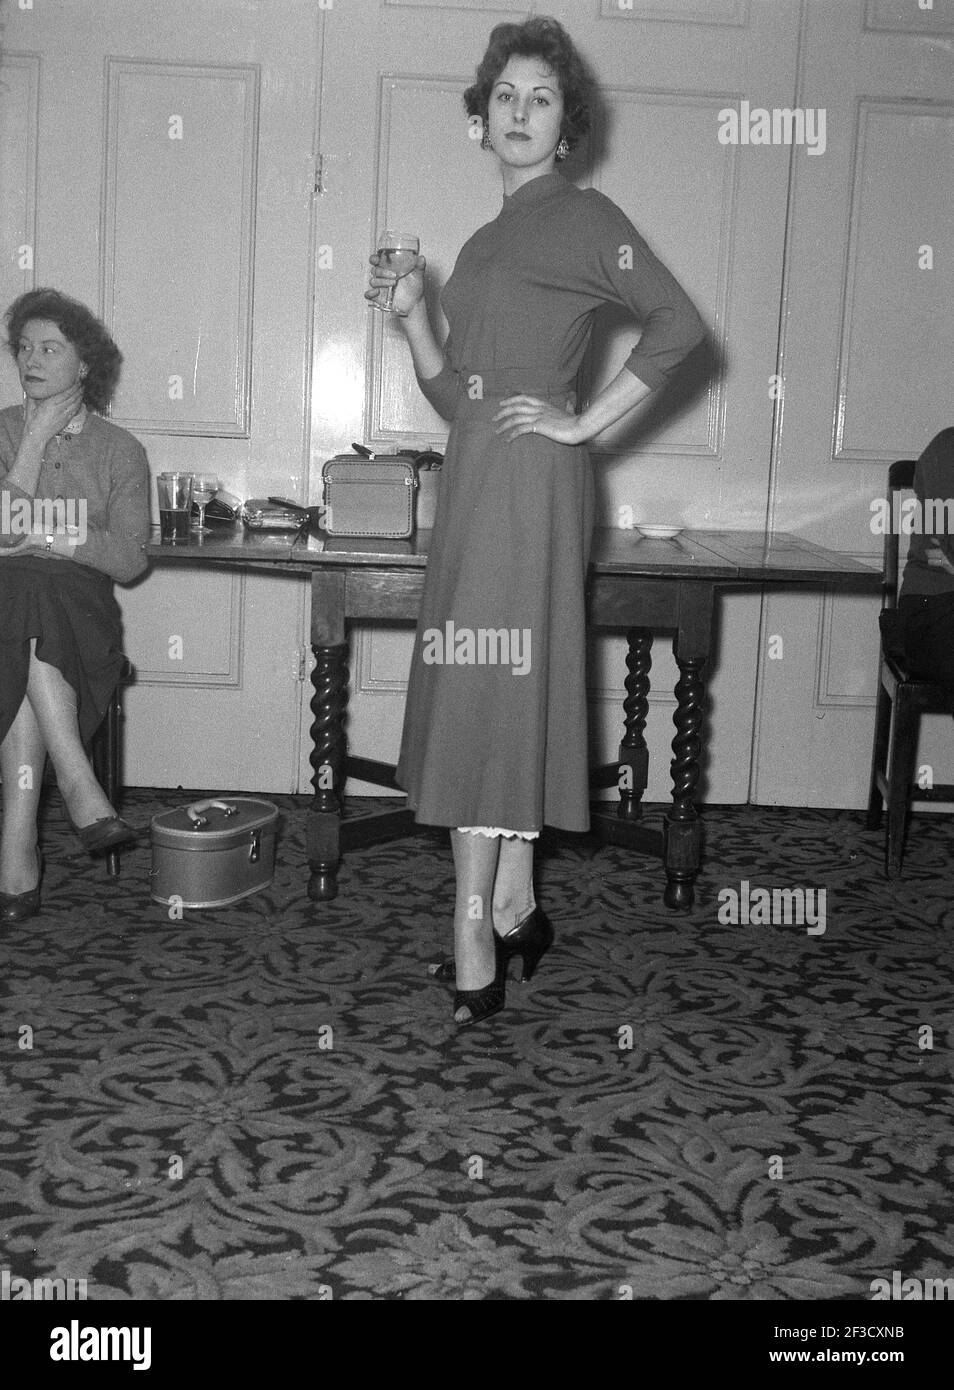 1950s office party Black and White Stock Photos & Images - Alamy